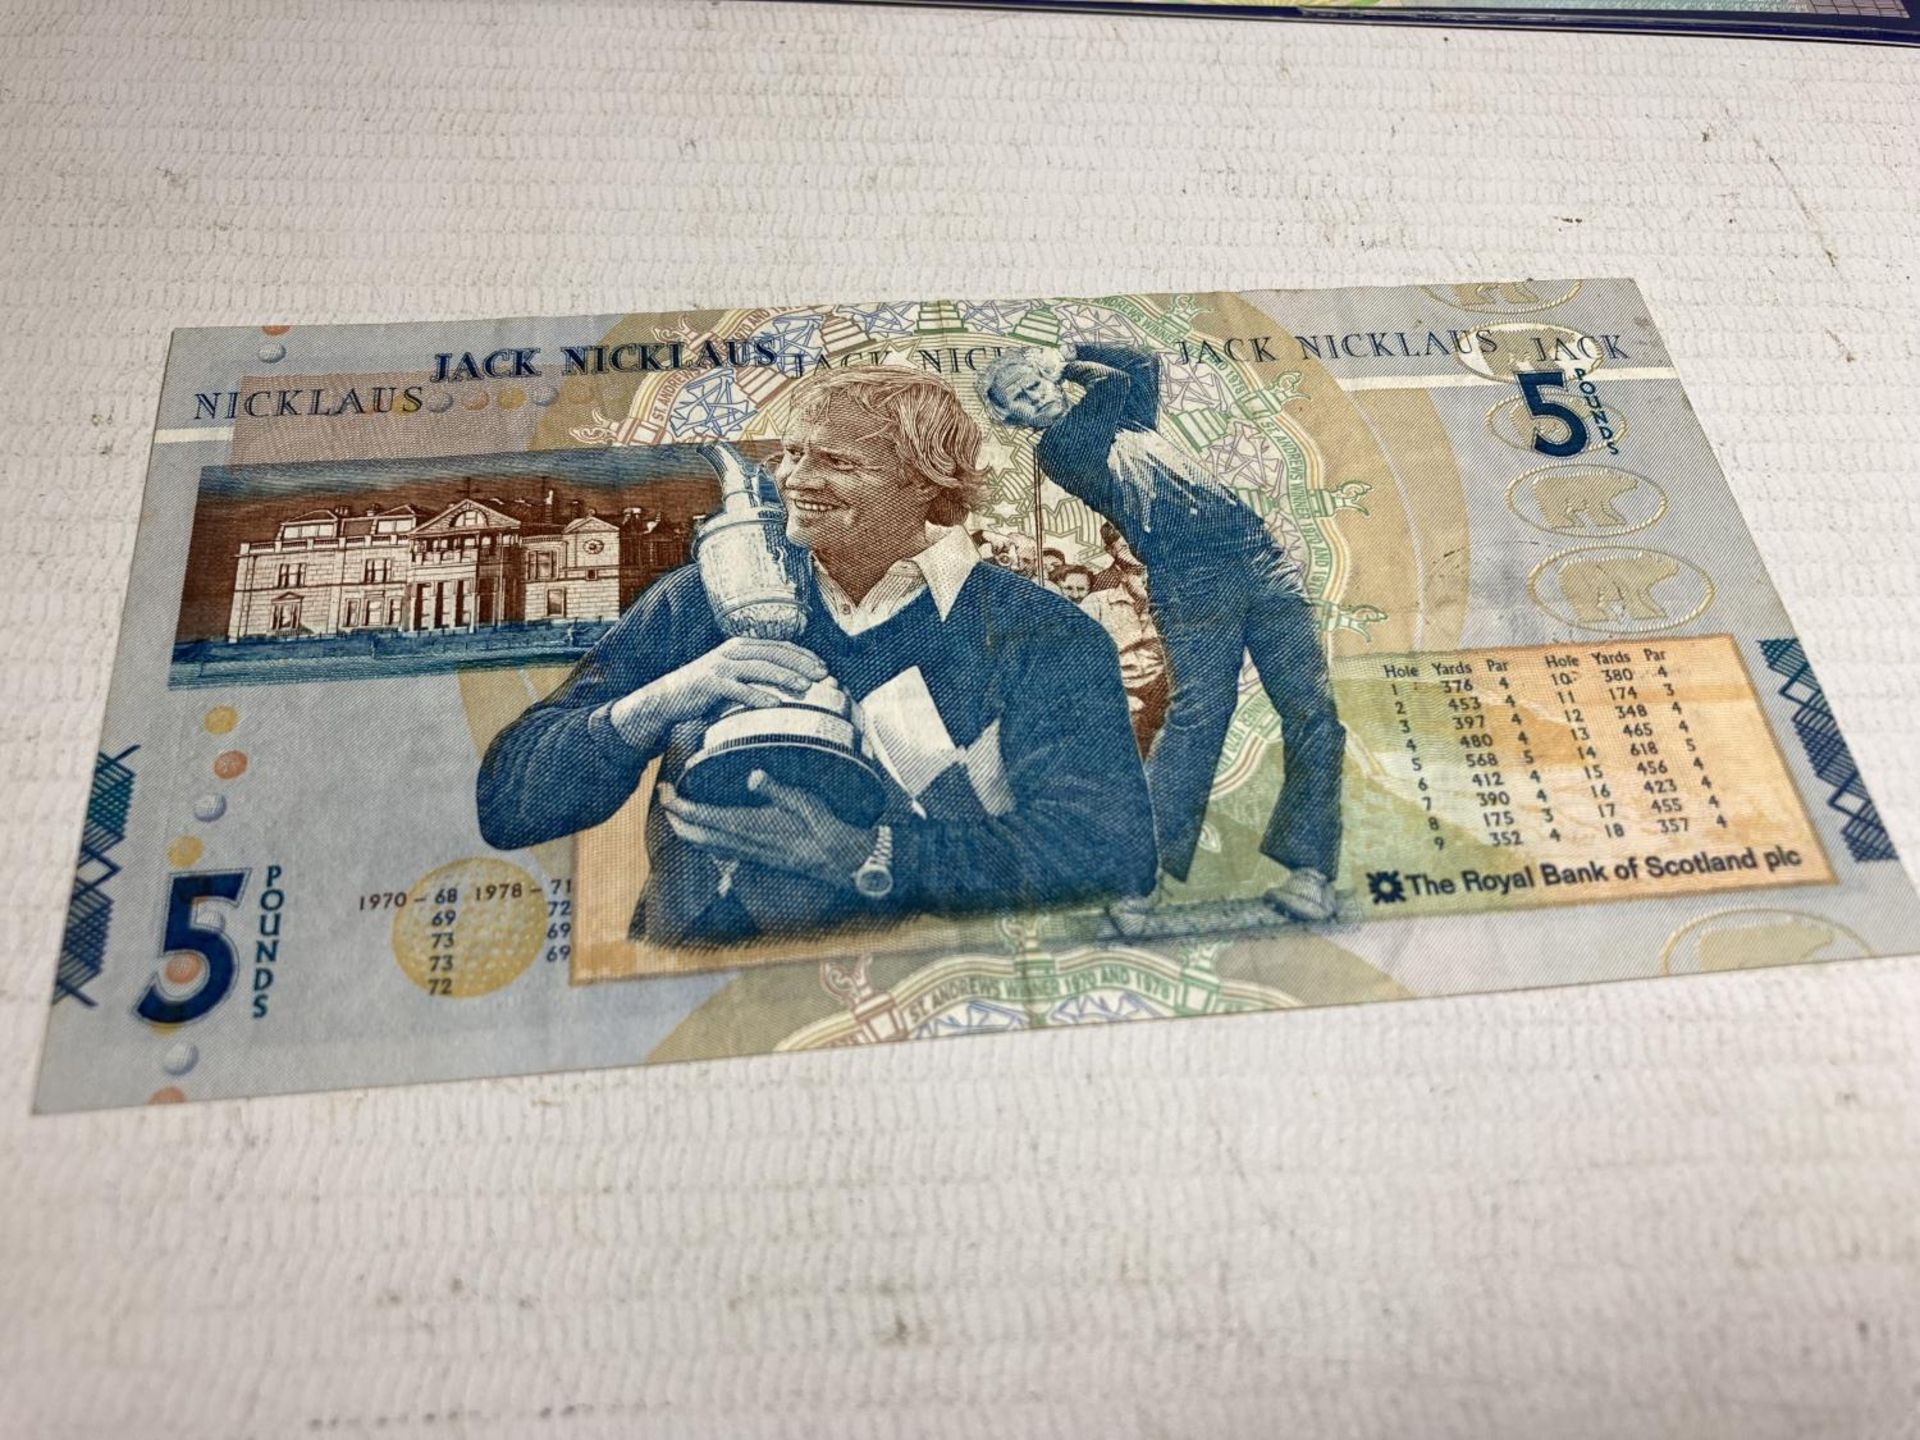 AN ULSTER BANK GEORGE BEST FIVE POUND NOTE IN A FOLDER AND A BANK OF SCOTLAND JACK NICKLAUS FIVE - Image 4 of 7